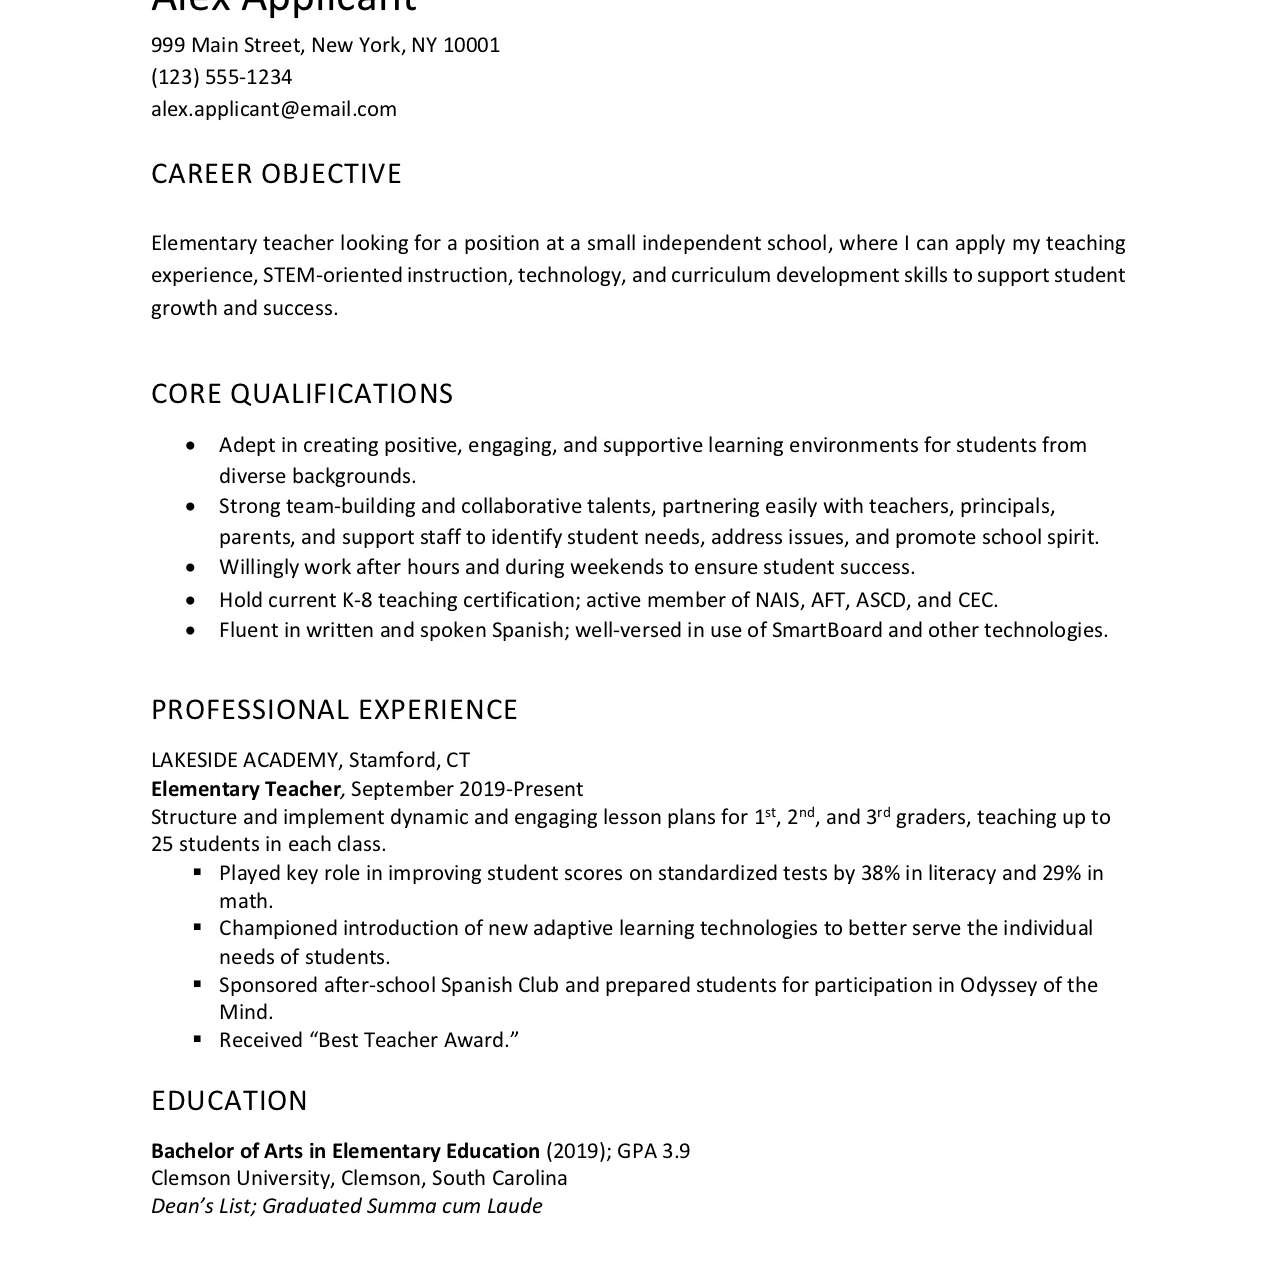 Work From Home Resume Objective Sample Resume Objective Examples and Writing Tips